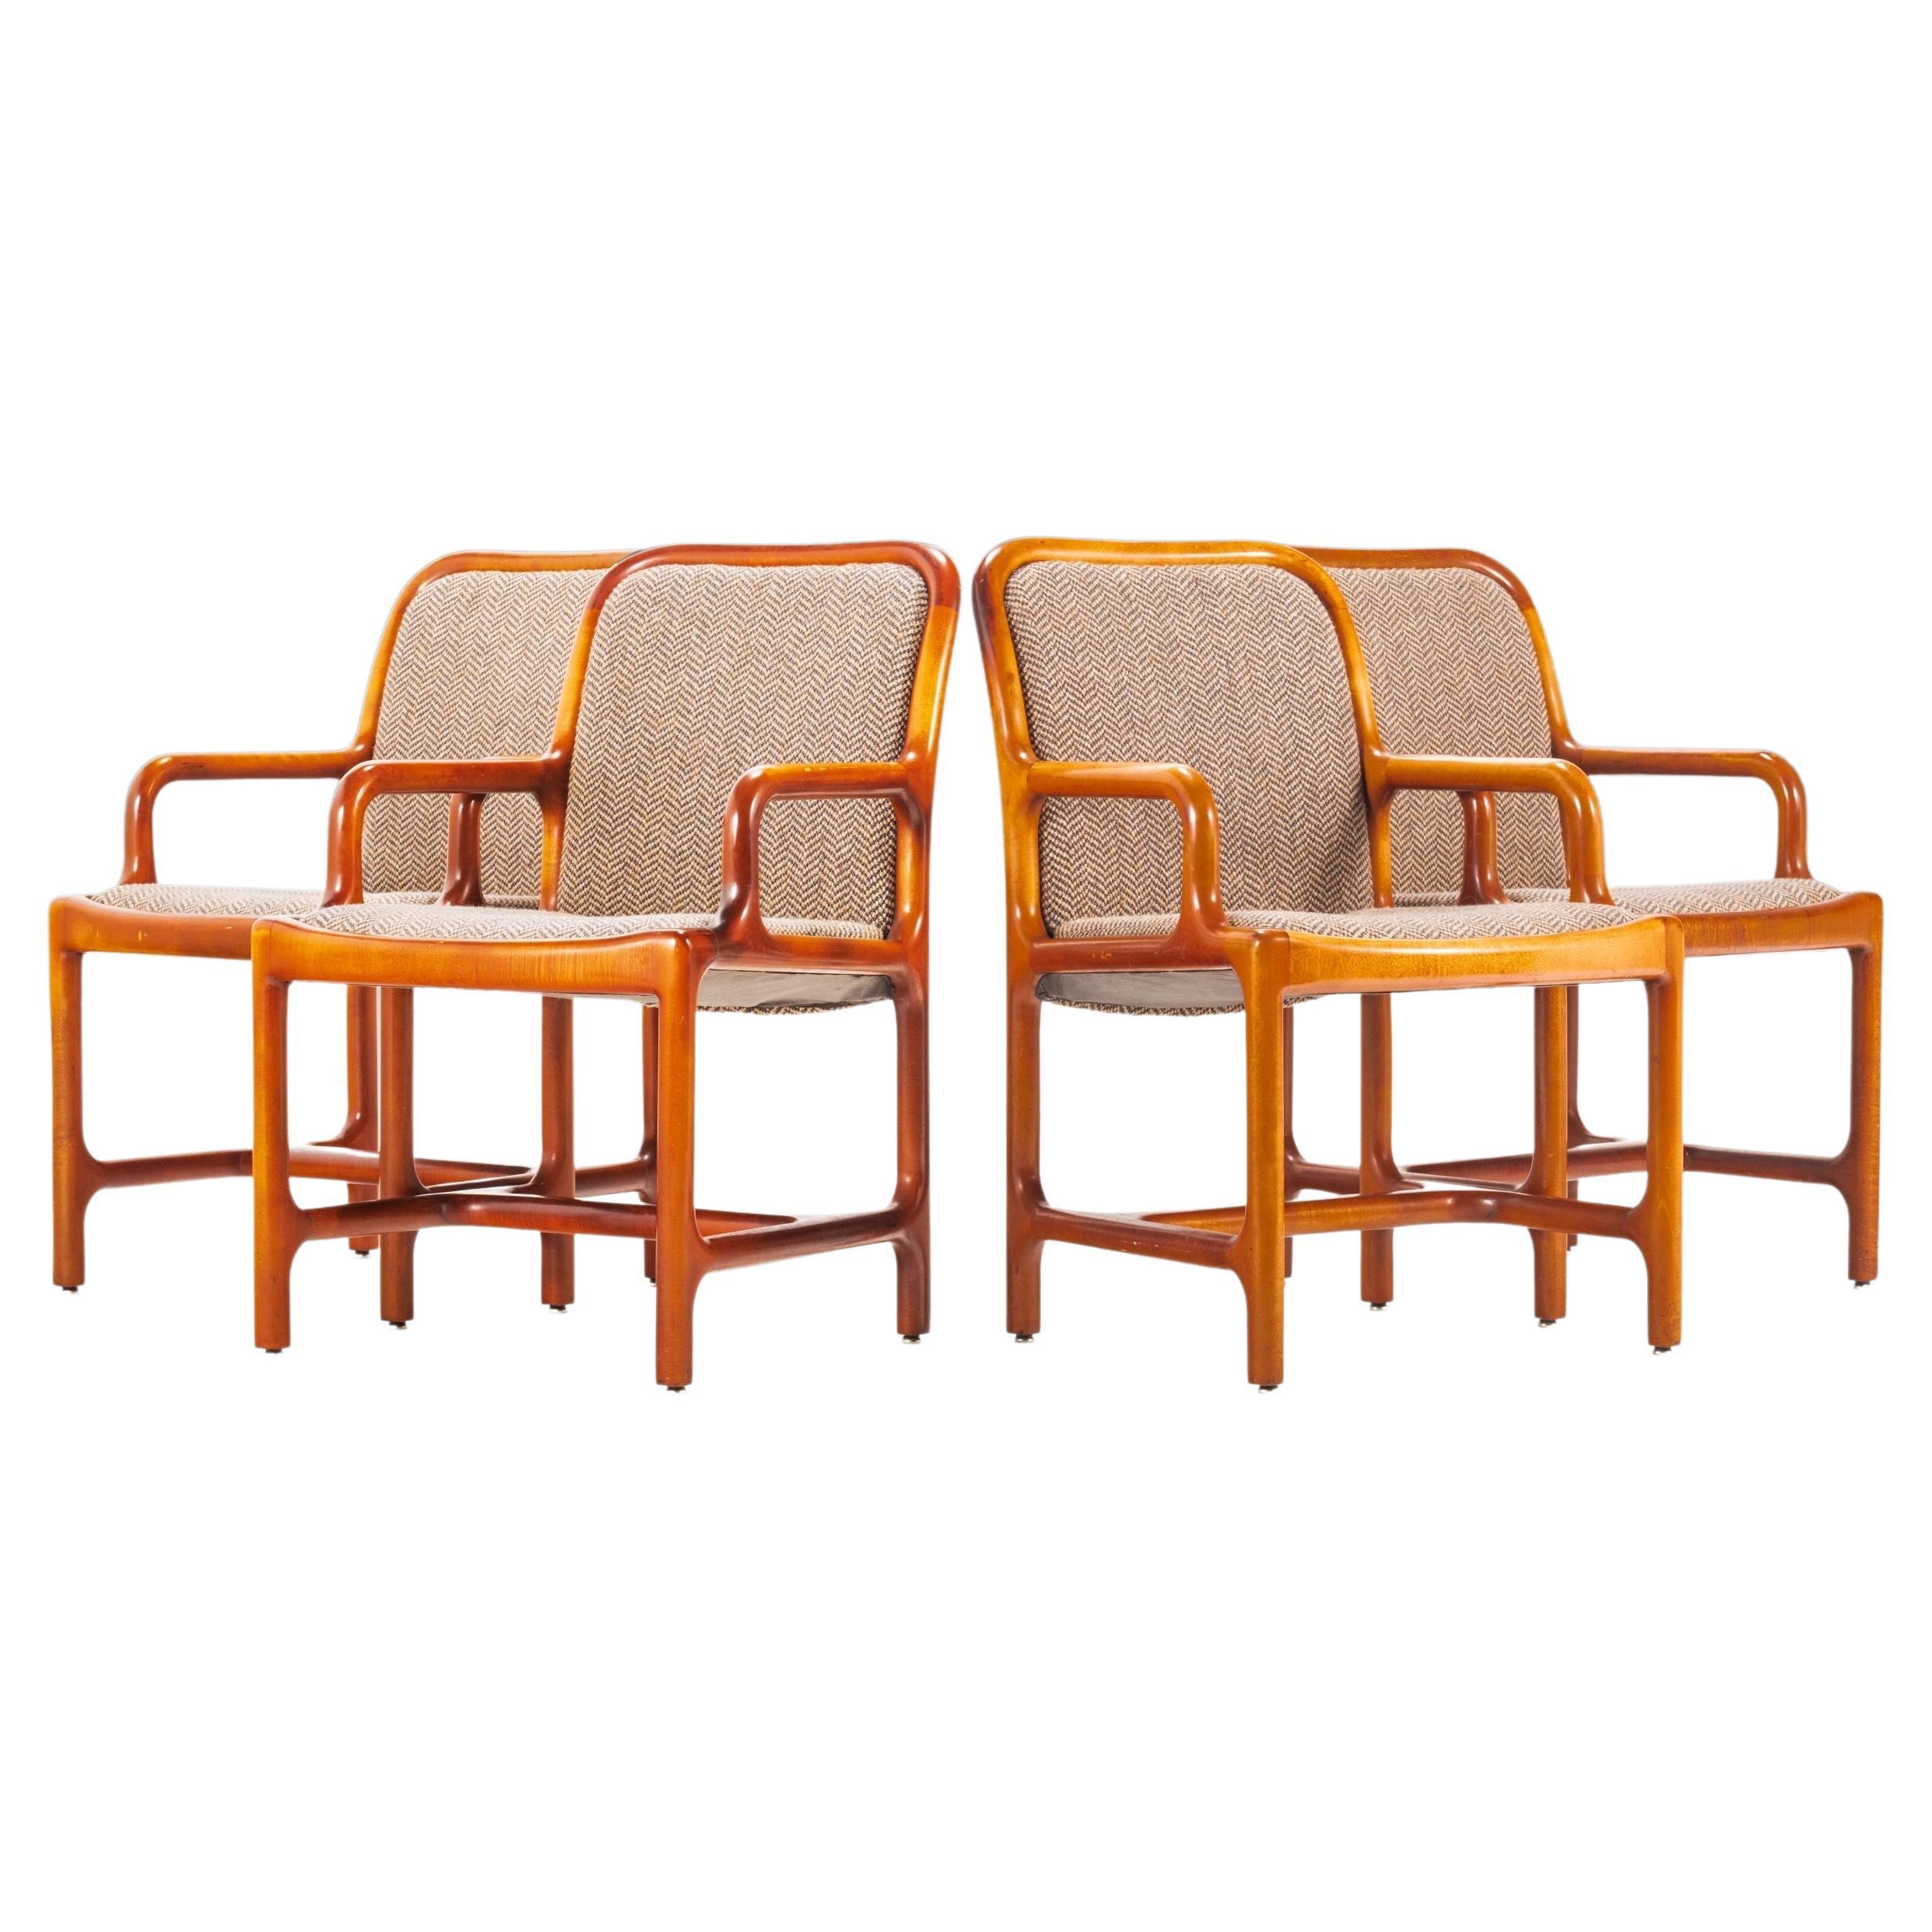 Set of Four (4) Pretzel Chairs in Oak and Original Tweed Fabric, USA, c. 1960's